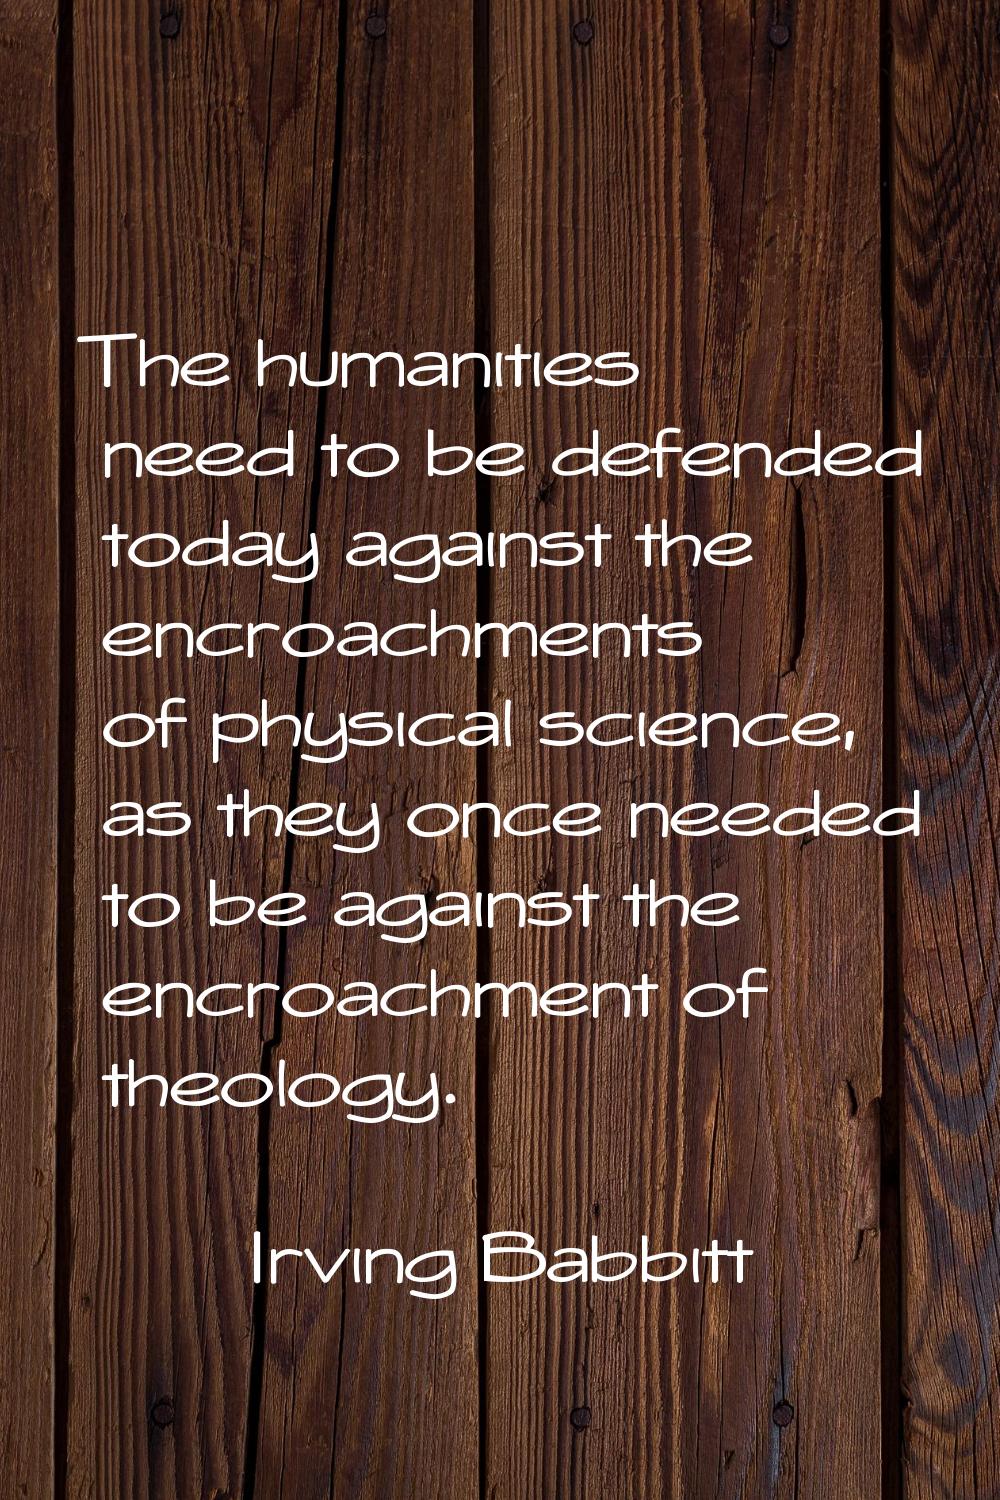 The humanities need to be defended today against the encroachments of physical science, as they onc